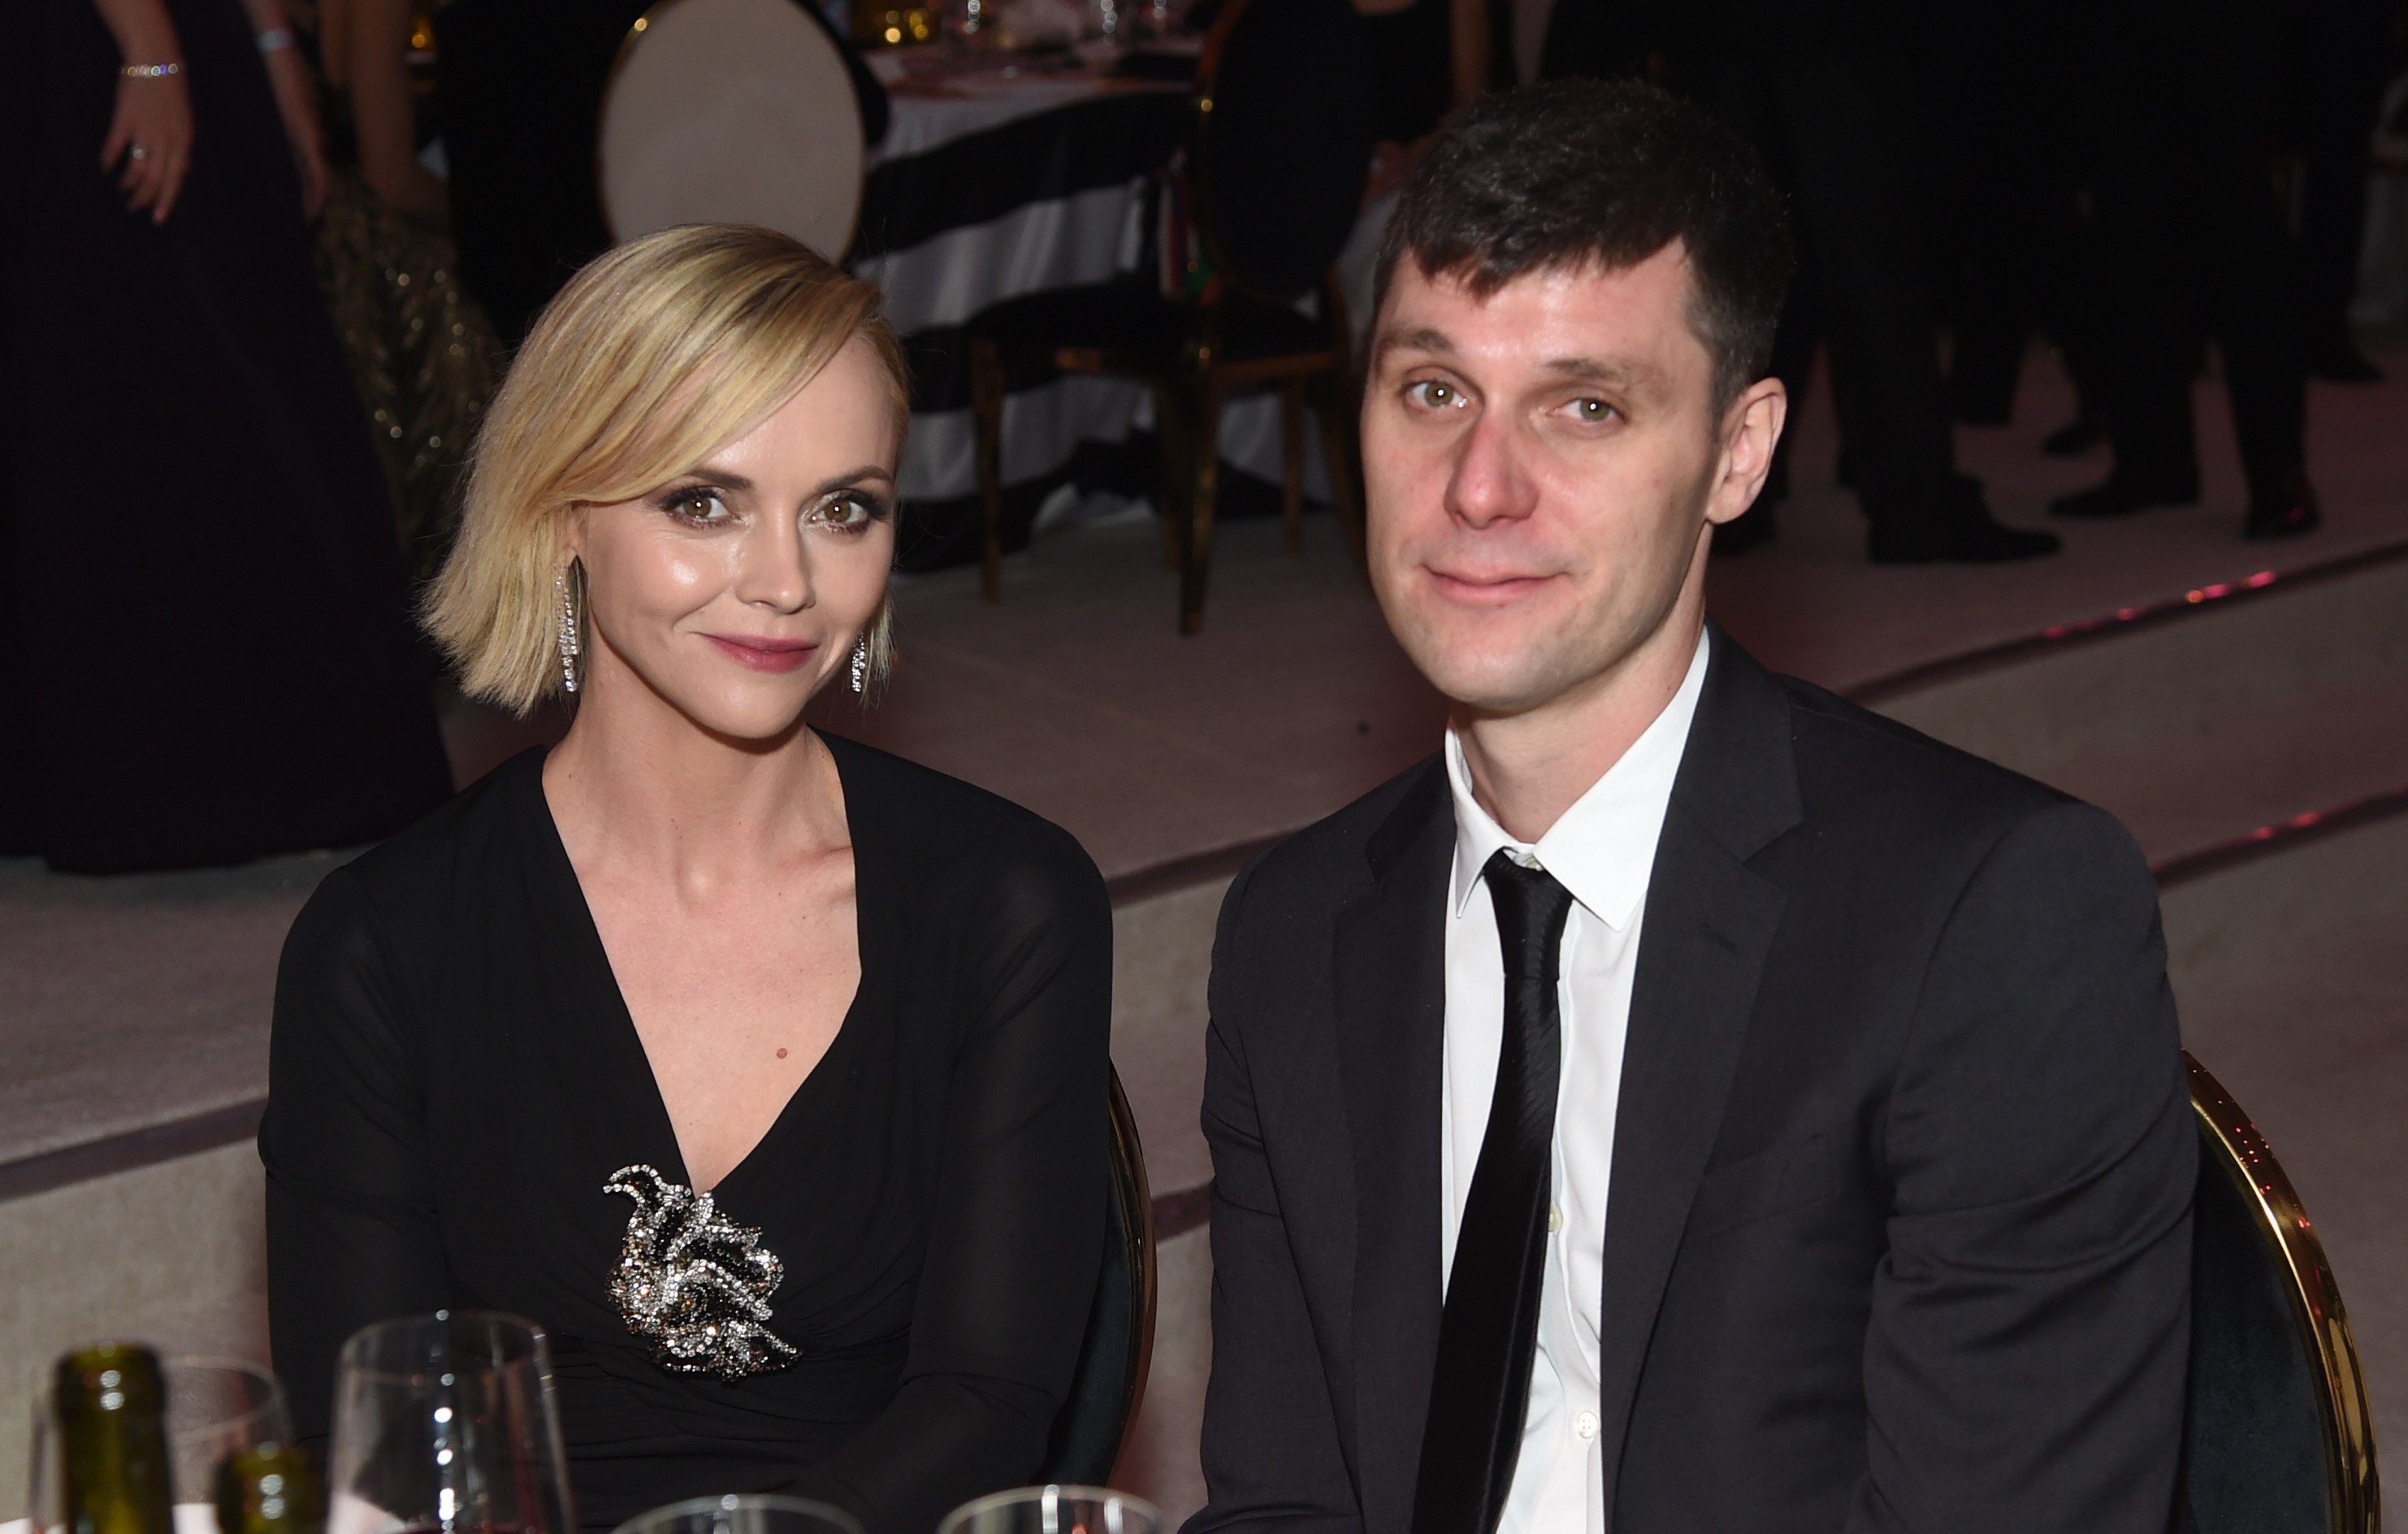 Christina Ricci and James Heerdegen attend the 27th annual Elton John AIDS Foundation Academy Awards Viewing Party celebrating EJAF and the 91st Academy Awards on February 24, 2019, in West Hollywood, California. | Source: Getty Images